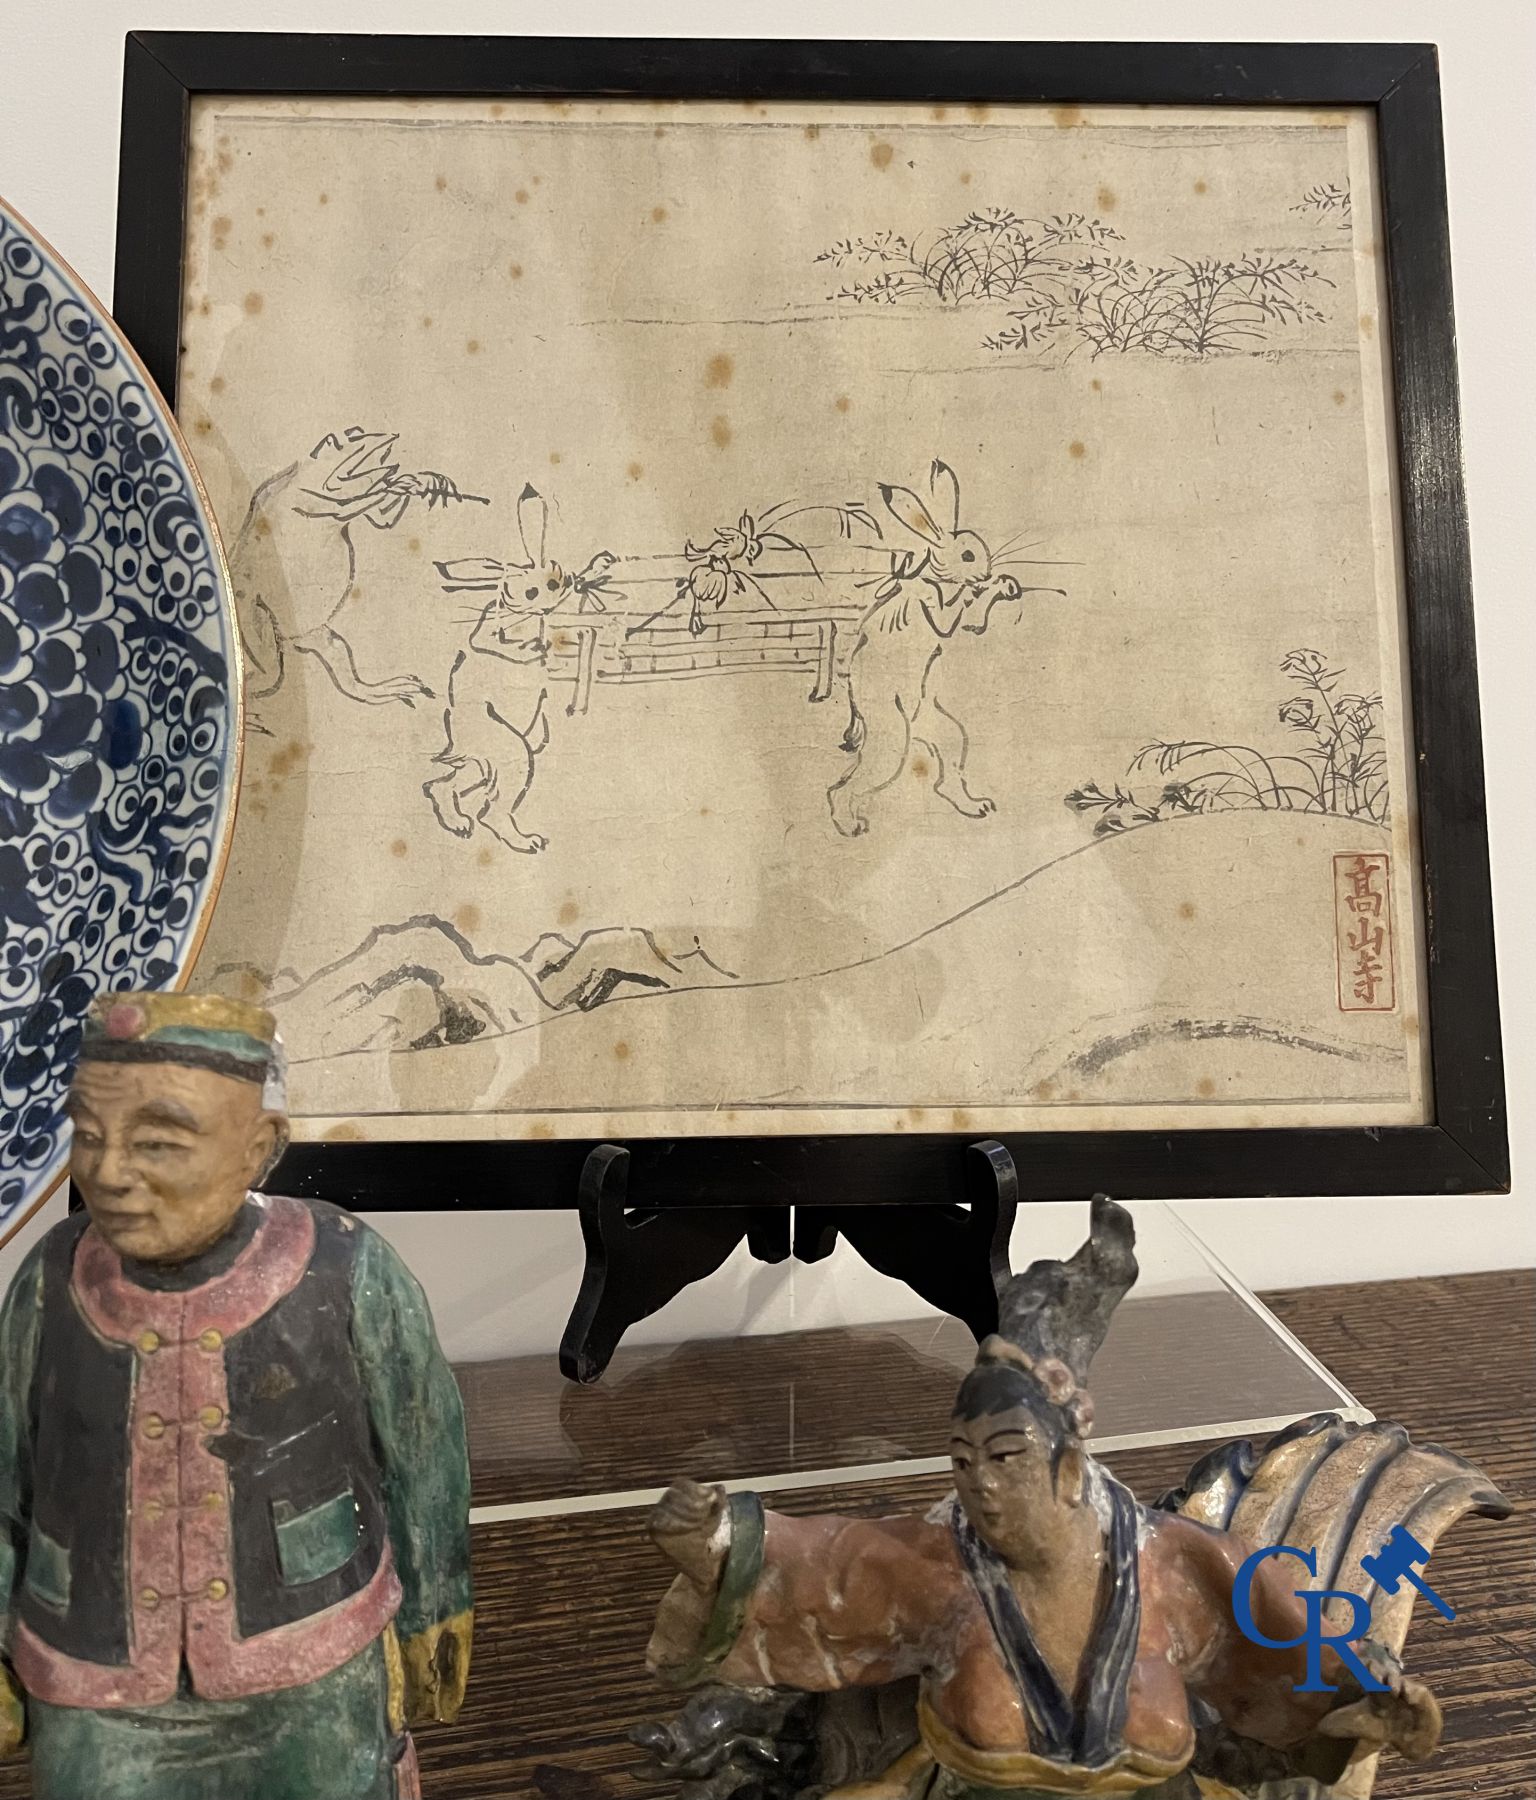 Asian Art: Lot with various objects in pottery and porcelain and an ink drawing. - Image 3 of 16